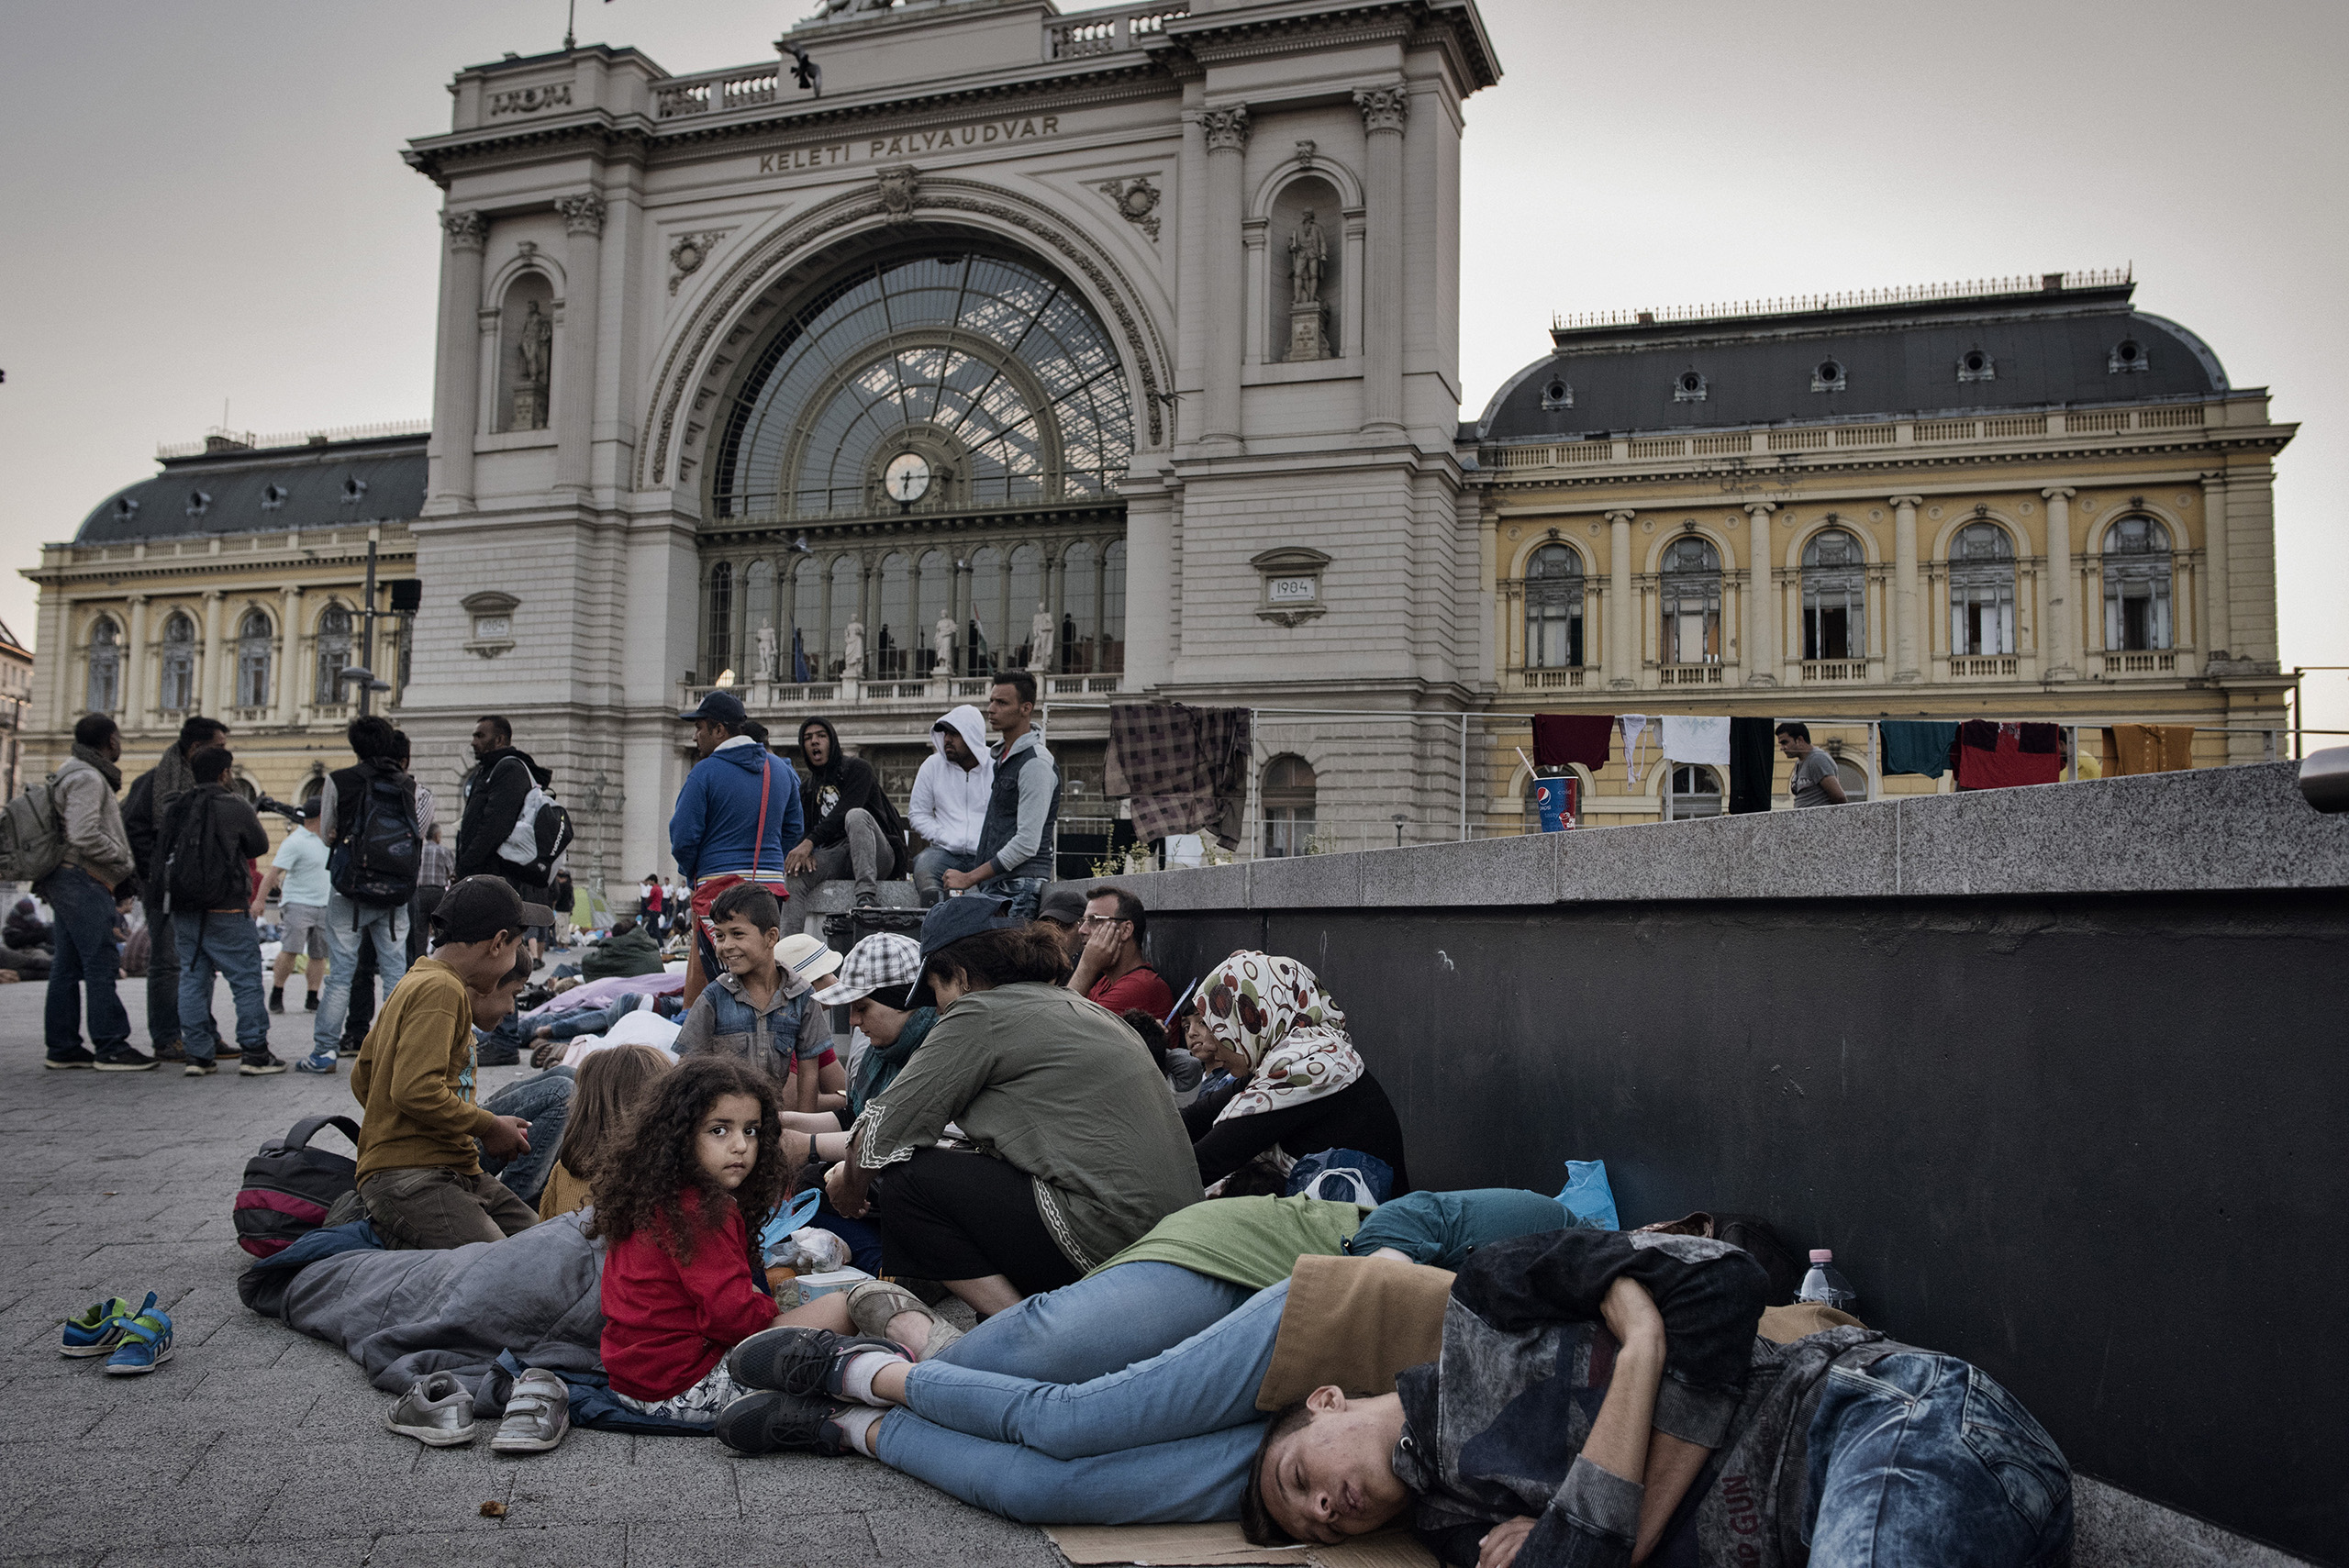 Hungary’s Budapest-Keleti railway station became a temporary camp for refugees. (Yuri Kozyrev—NOOR for TIME)